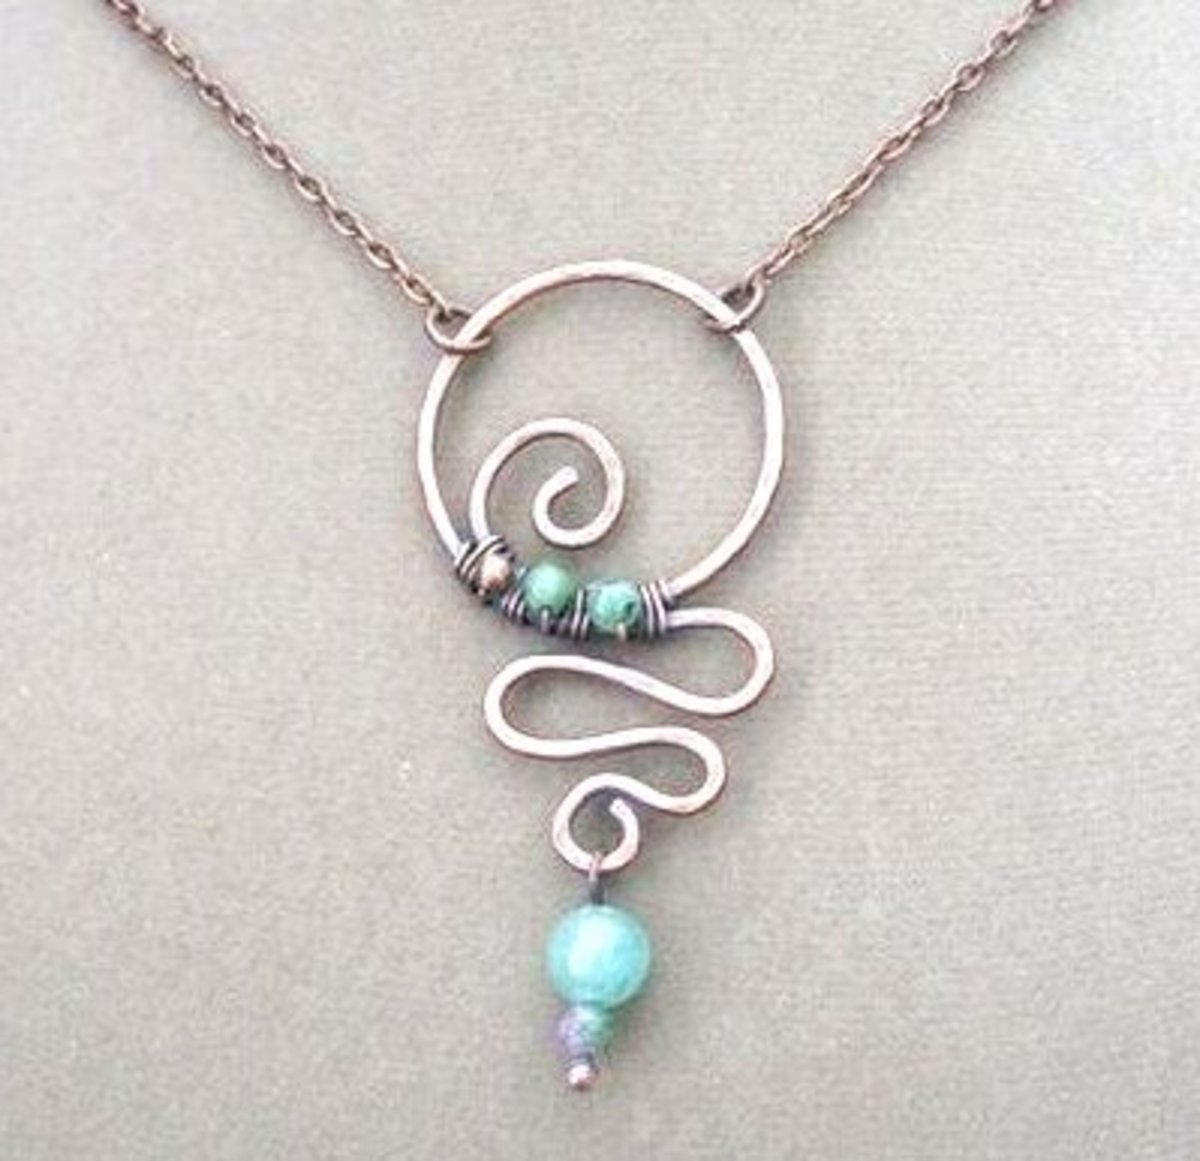 TracyArtes' Wire Wrapping Jewelry Tutorials has an Unusual Flair / The  Beading Gem